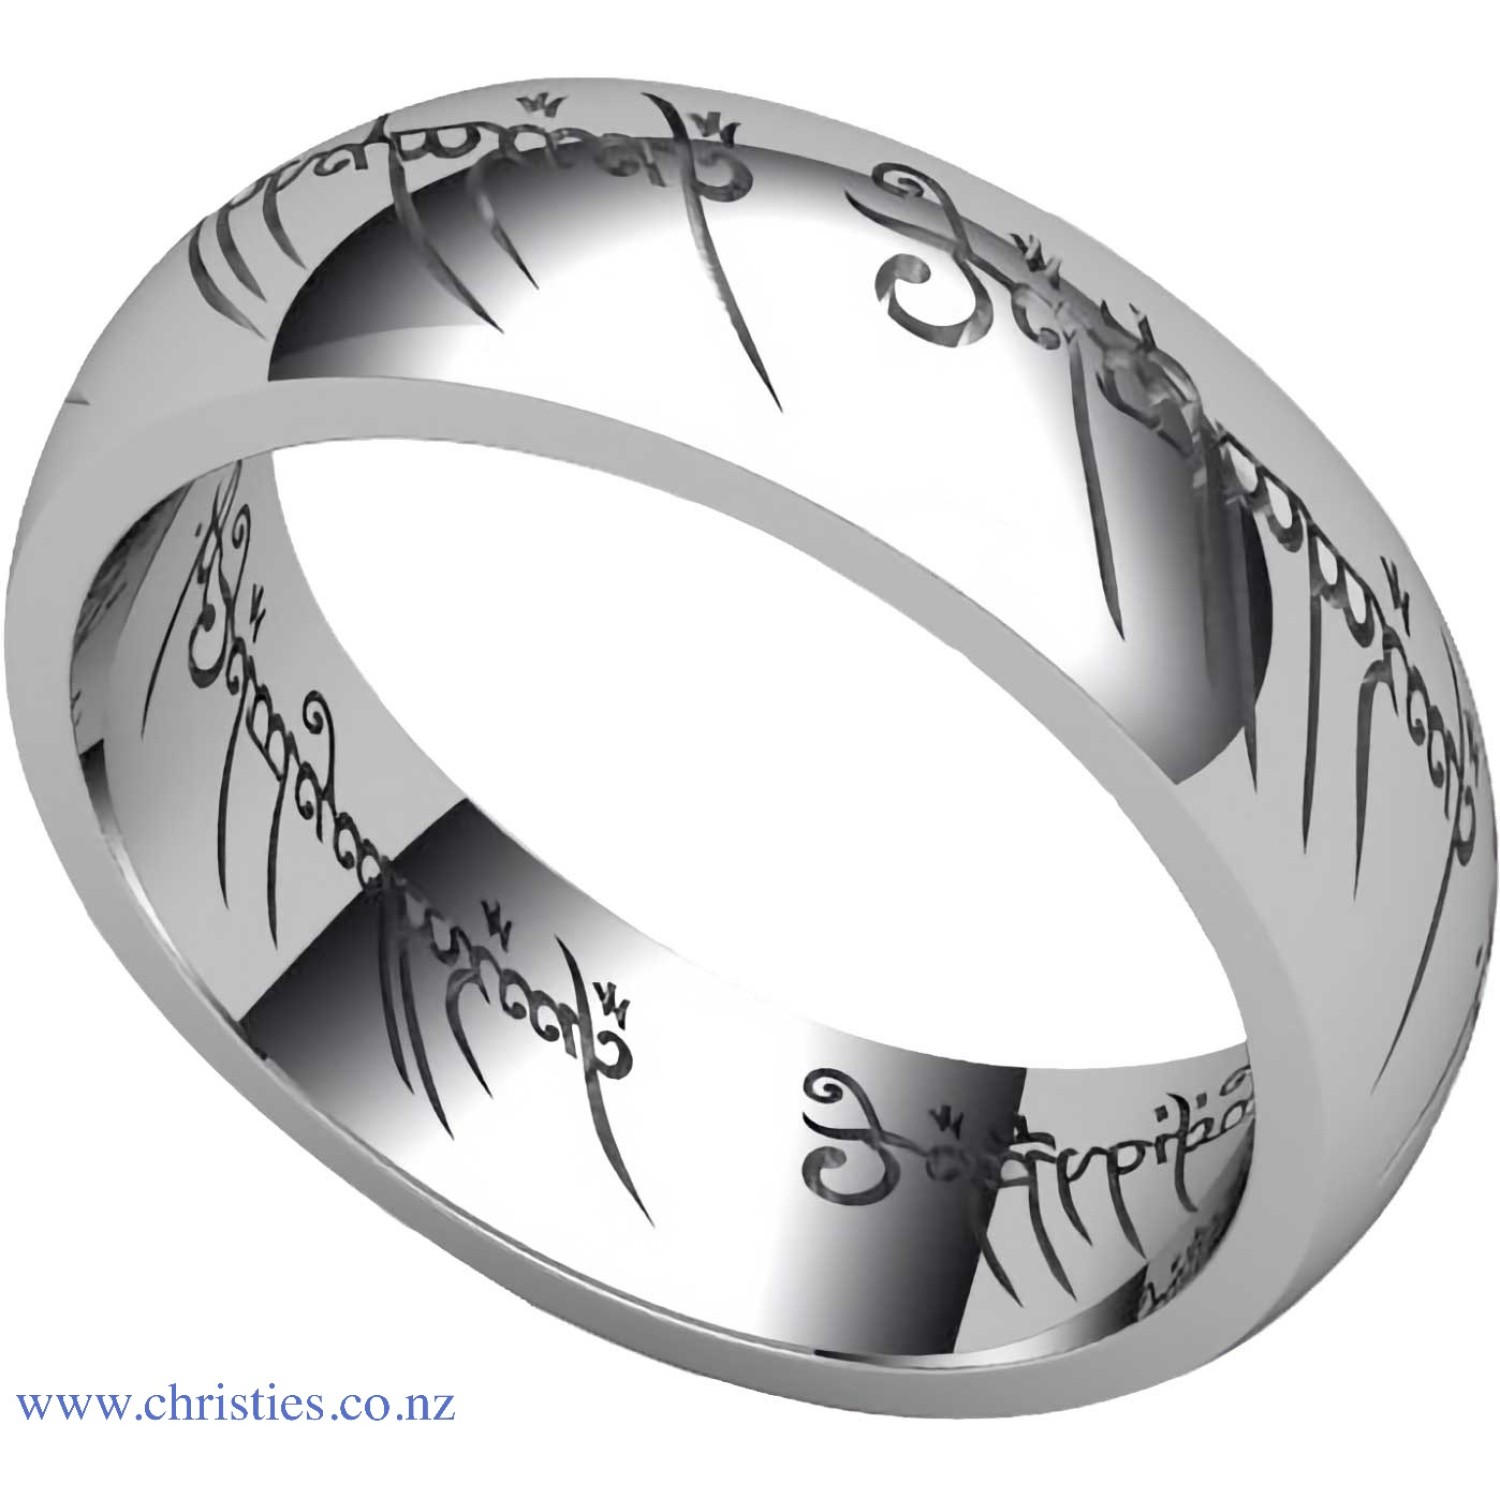 Lord of The Rings One Ring Fine Engraving Silver. One ring to rule them all,One ring to find them,One ring to bring them all and in the darkness bind them. Lightly Engraved with Elvish Runes. The Official Lord of the Rings One Ring handcrafted here in Mid